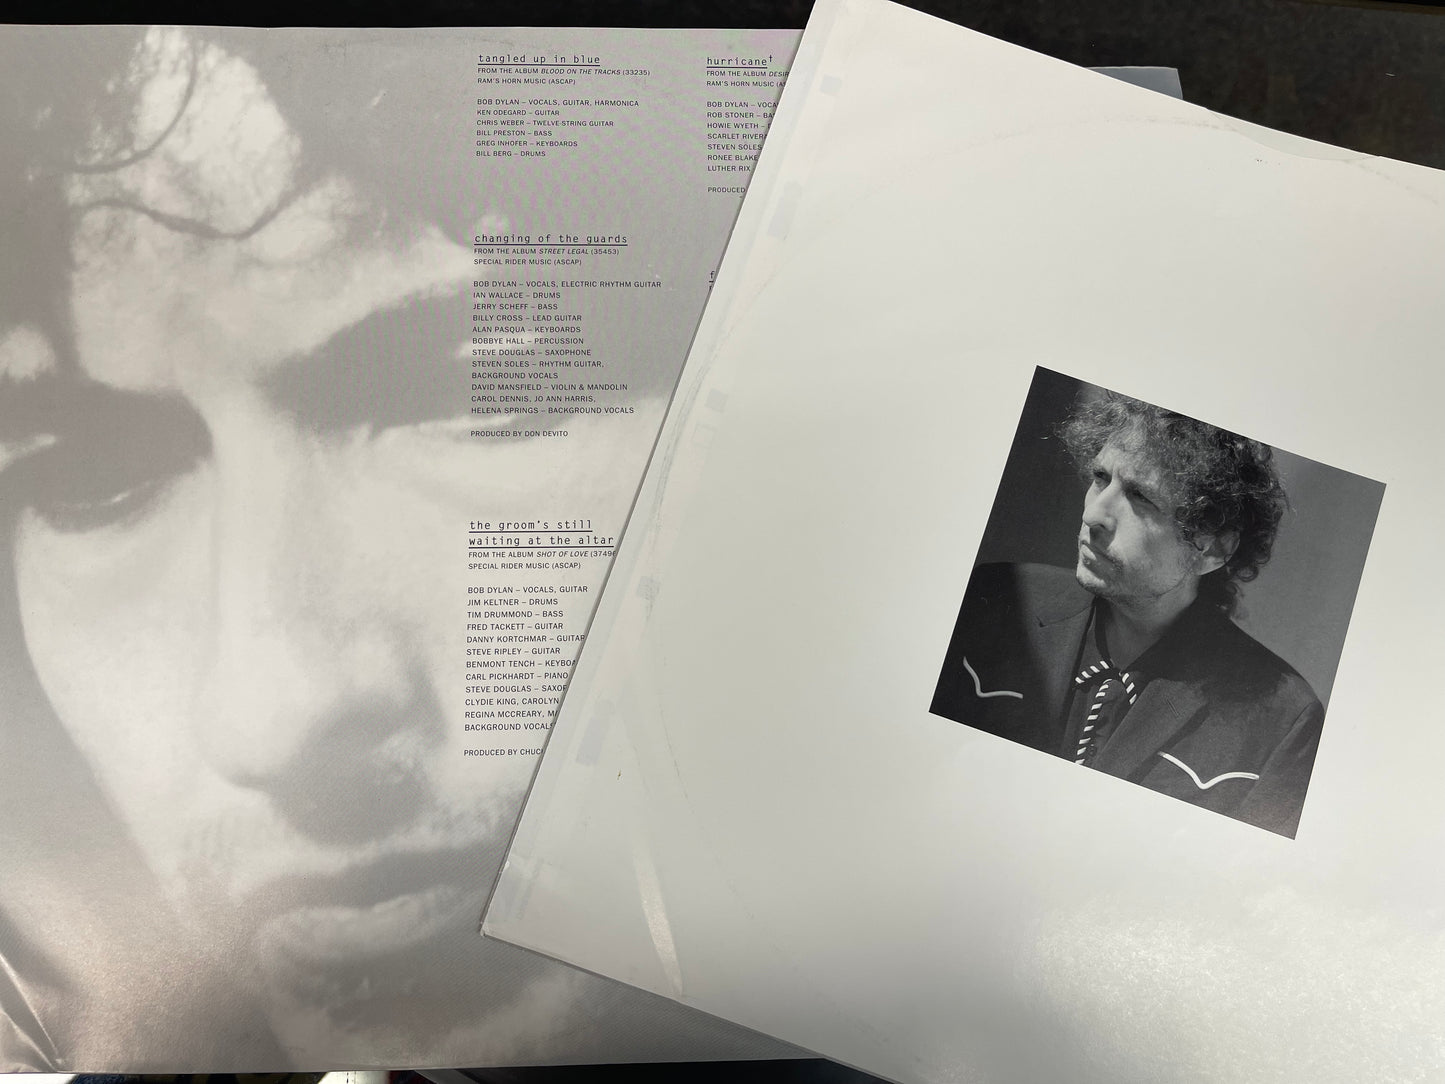 Bob Dylan’s Greatest Hits Volume 3 (1994, EU Only Pressing)